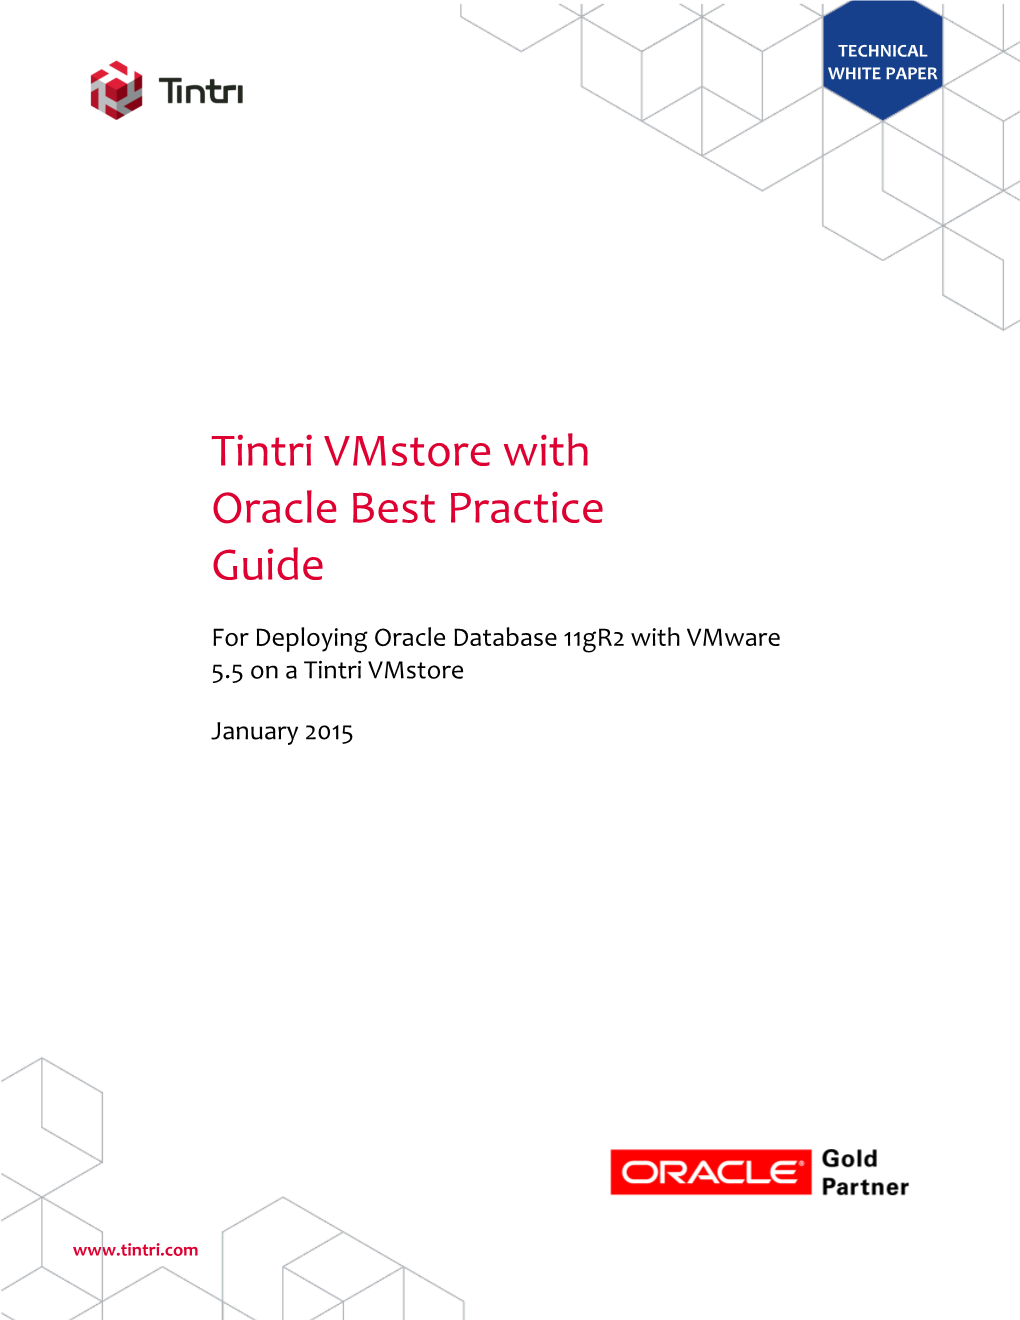 Tintri Vmstore with Oracle Best Practice Guide